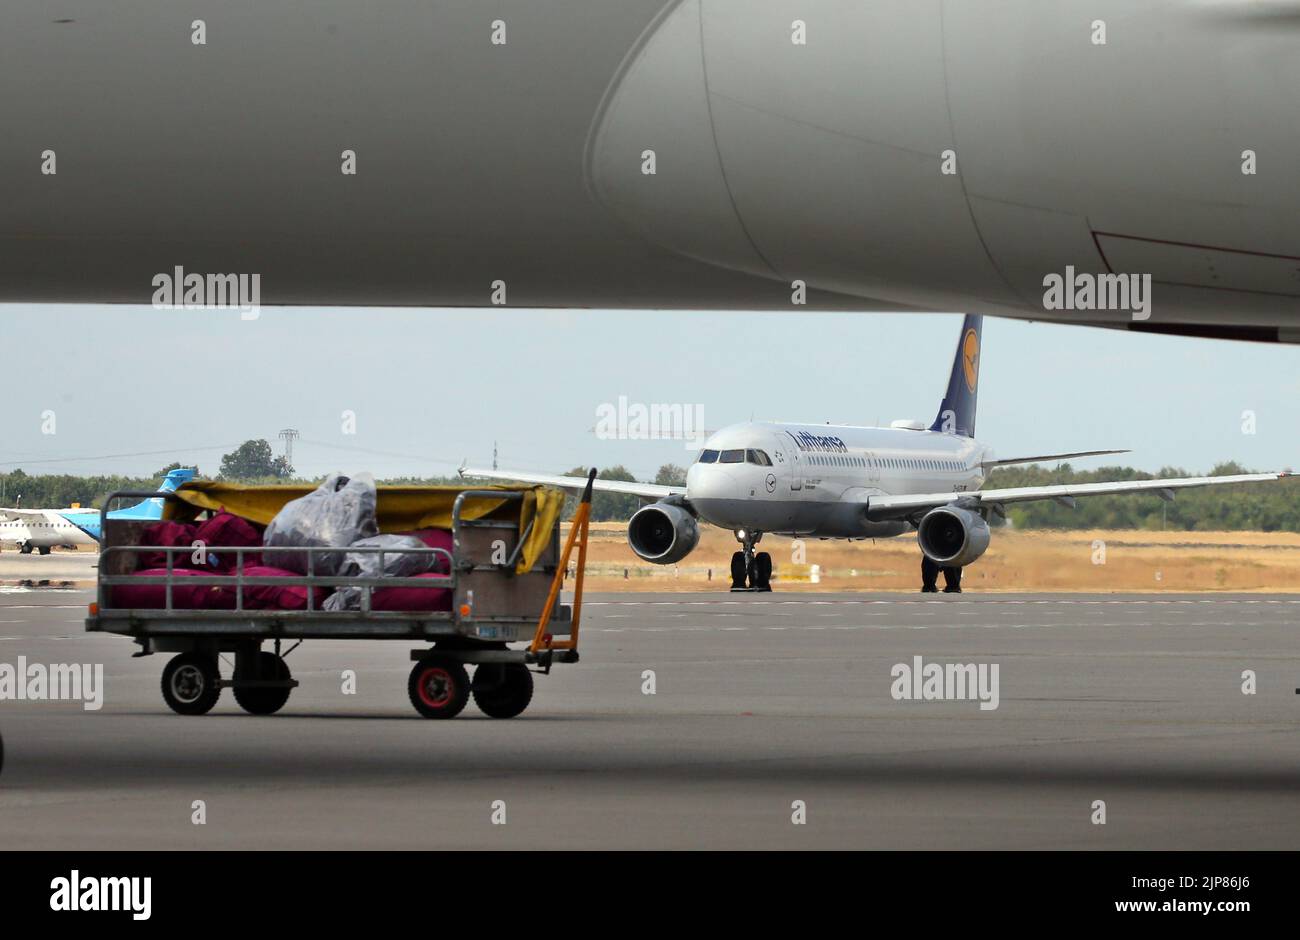 12 August 2022, Brandenburg, Schönefeld: Under the fuselage of a Qatar Airways Boeing 787 Dreamliner, a baggage cart is parked while a Lufthansa Airbus A320-200 taxis by in the background. Photo: Wolfgang Kumm/dpa Stock Photo